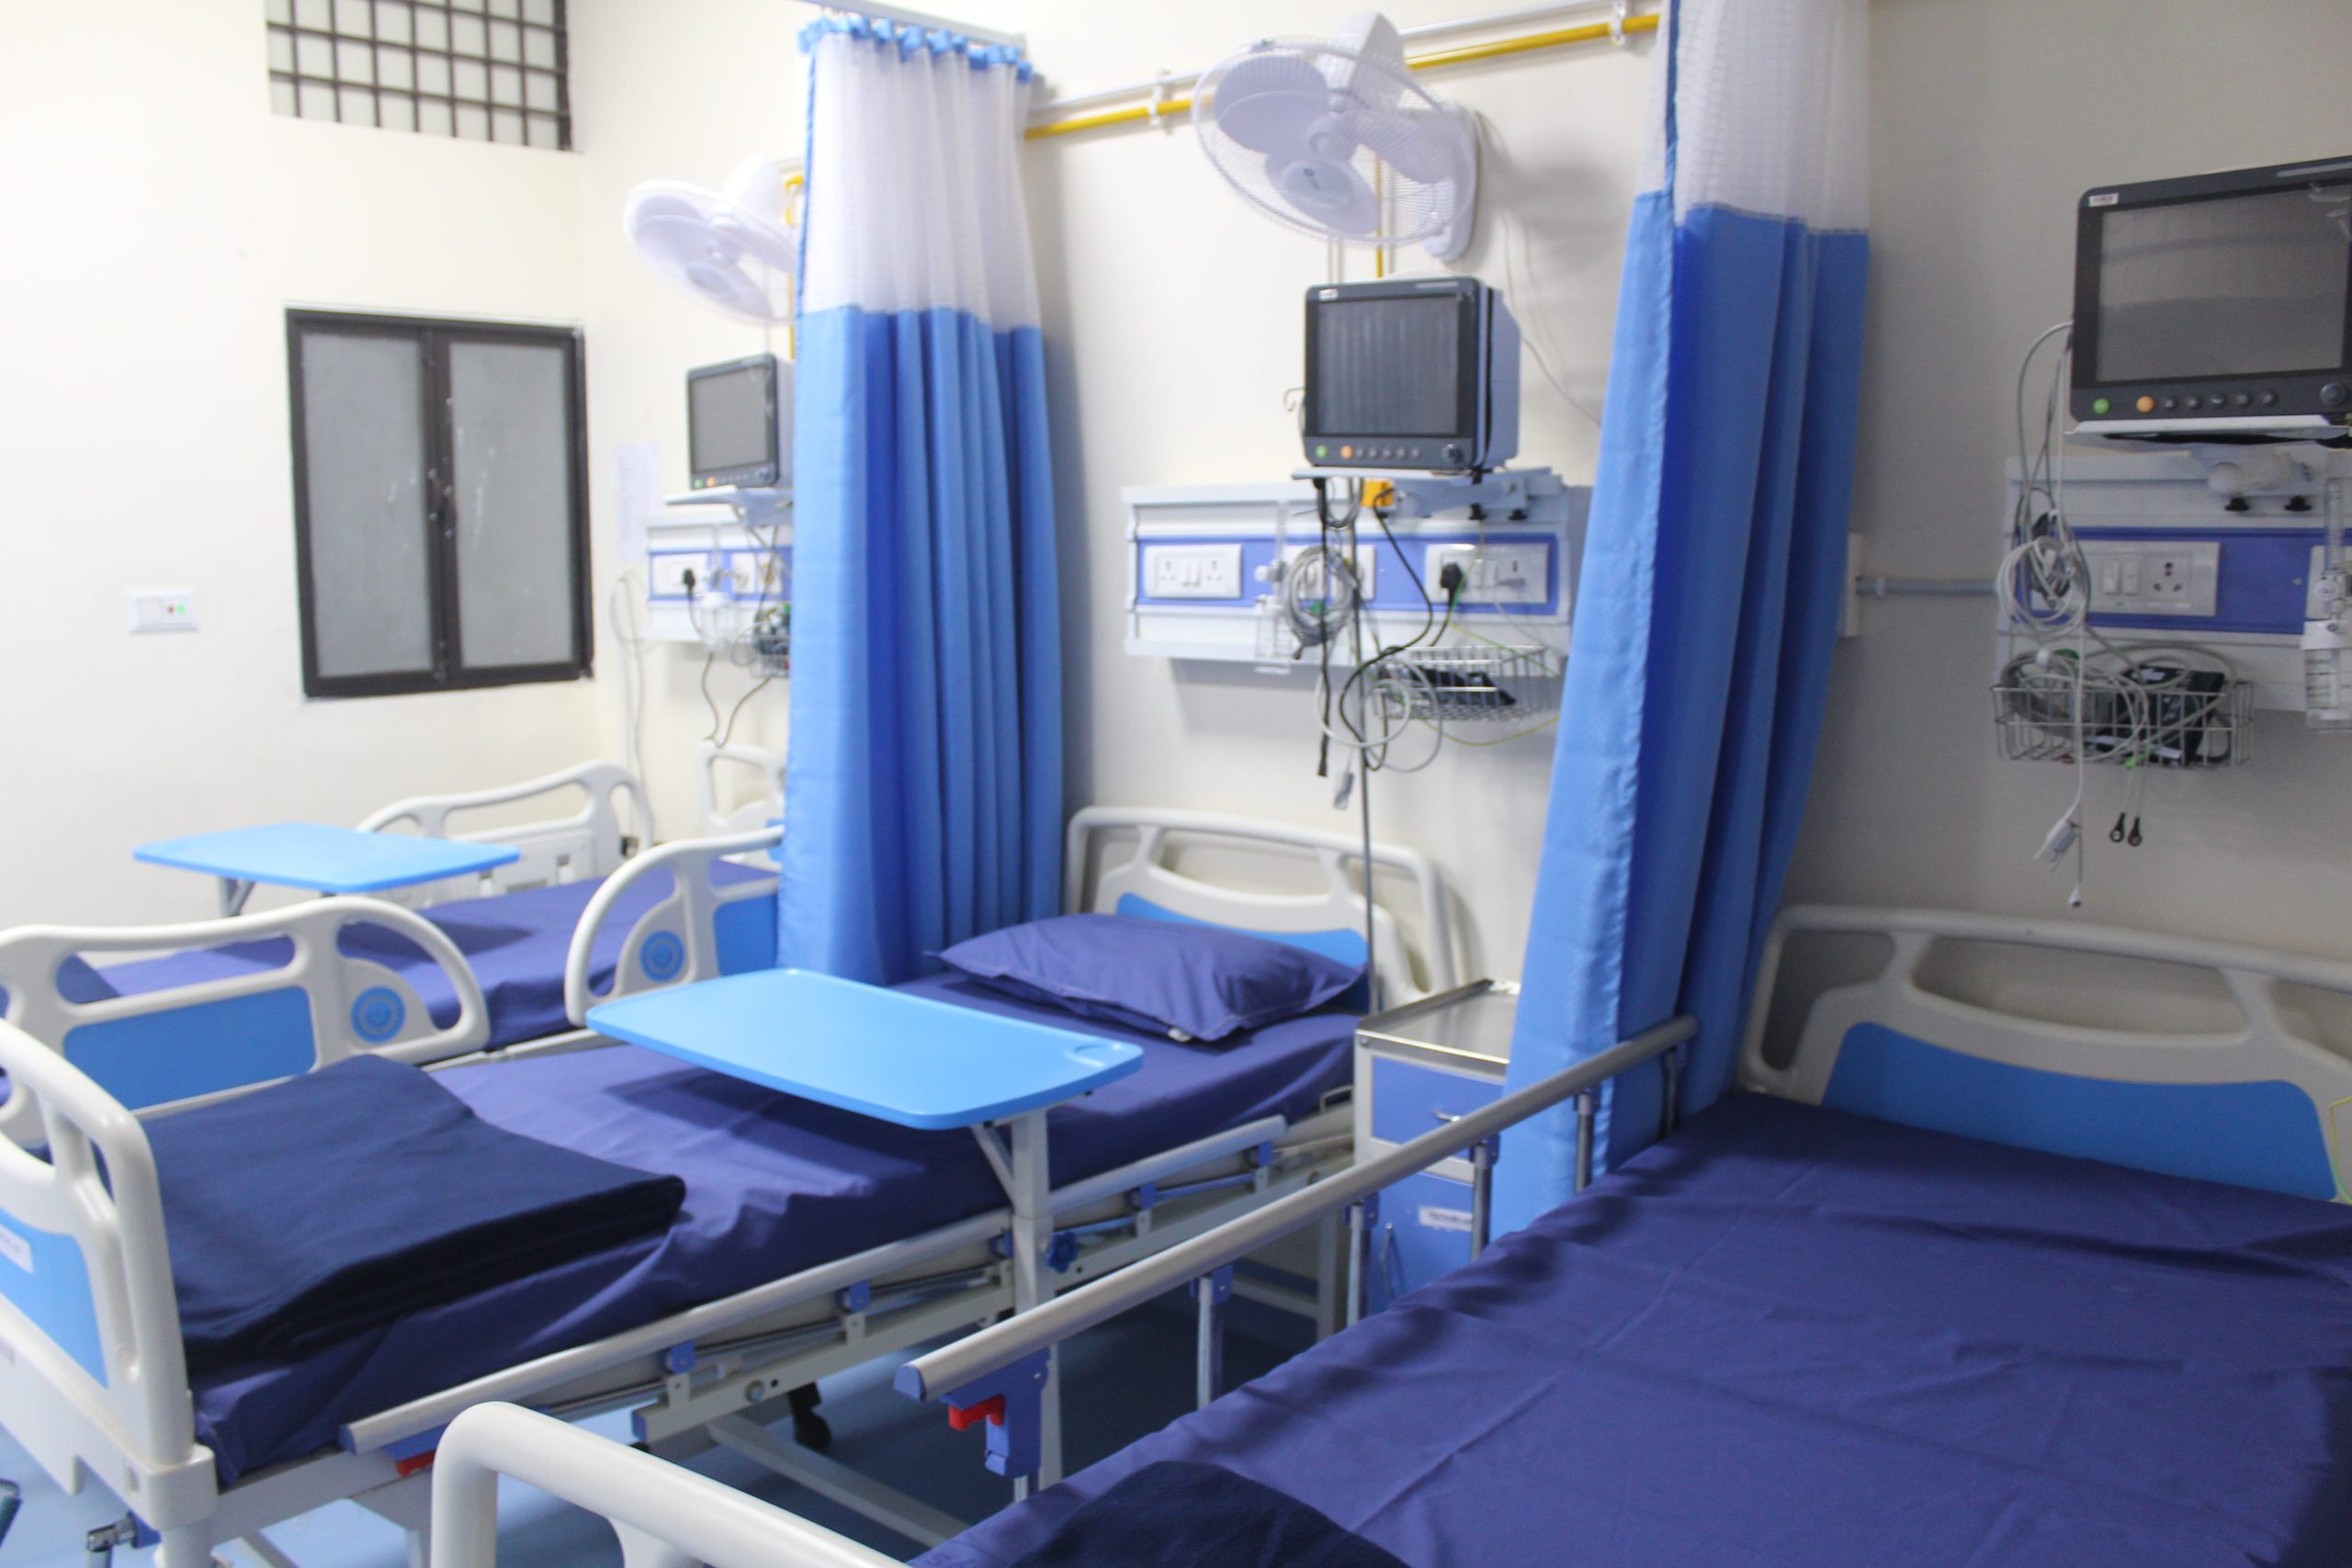 Chest, Trauma, and Neurology Hospital in Sagar private wards offer comfort, privacy, and a peaceful environment.